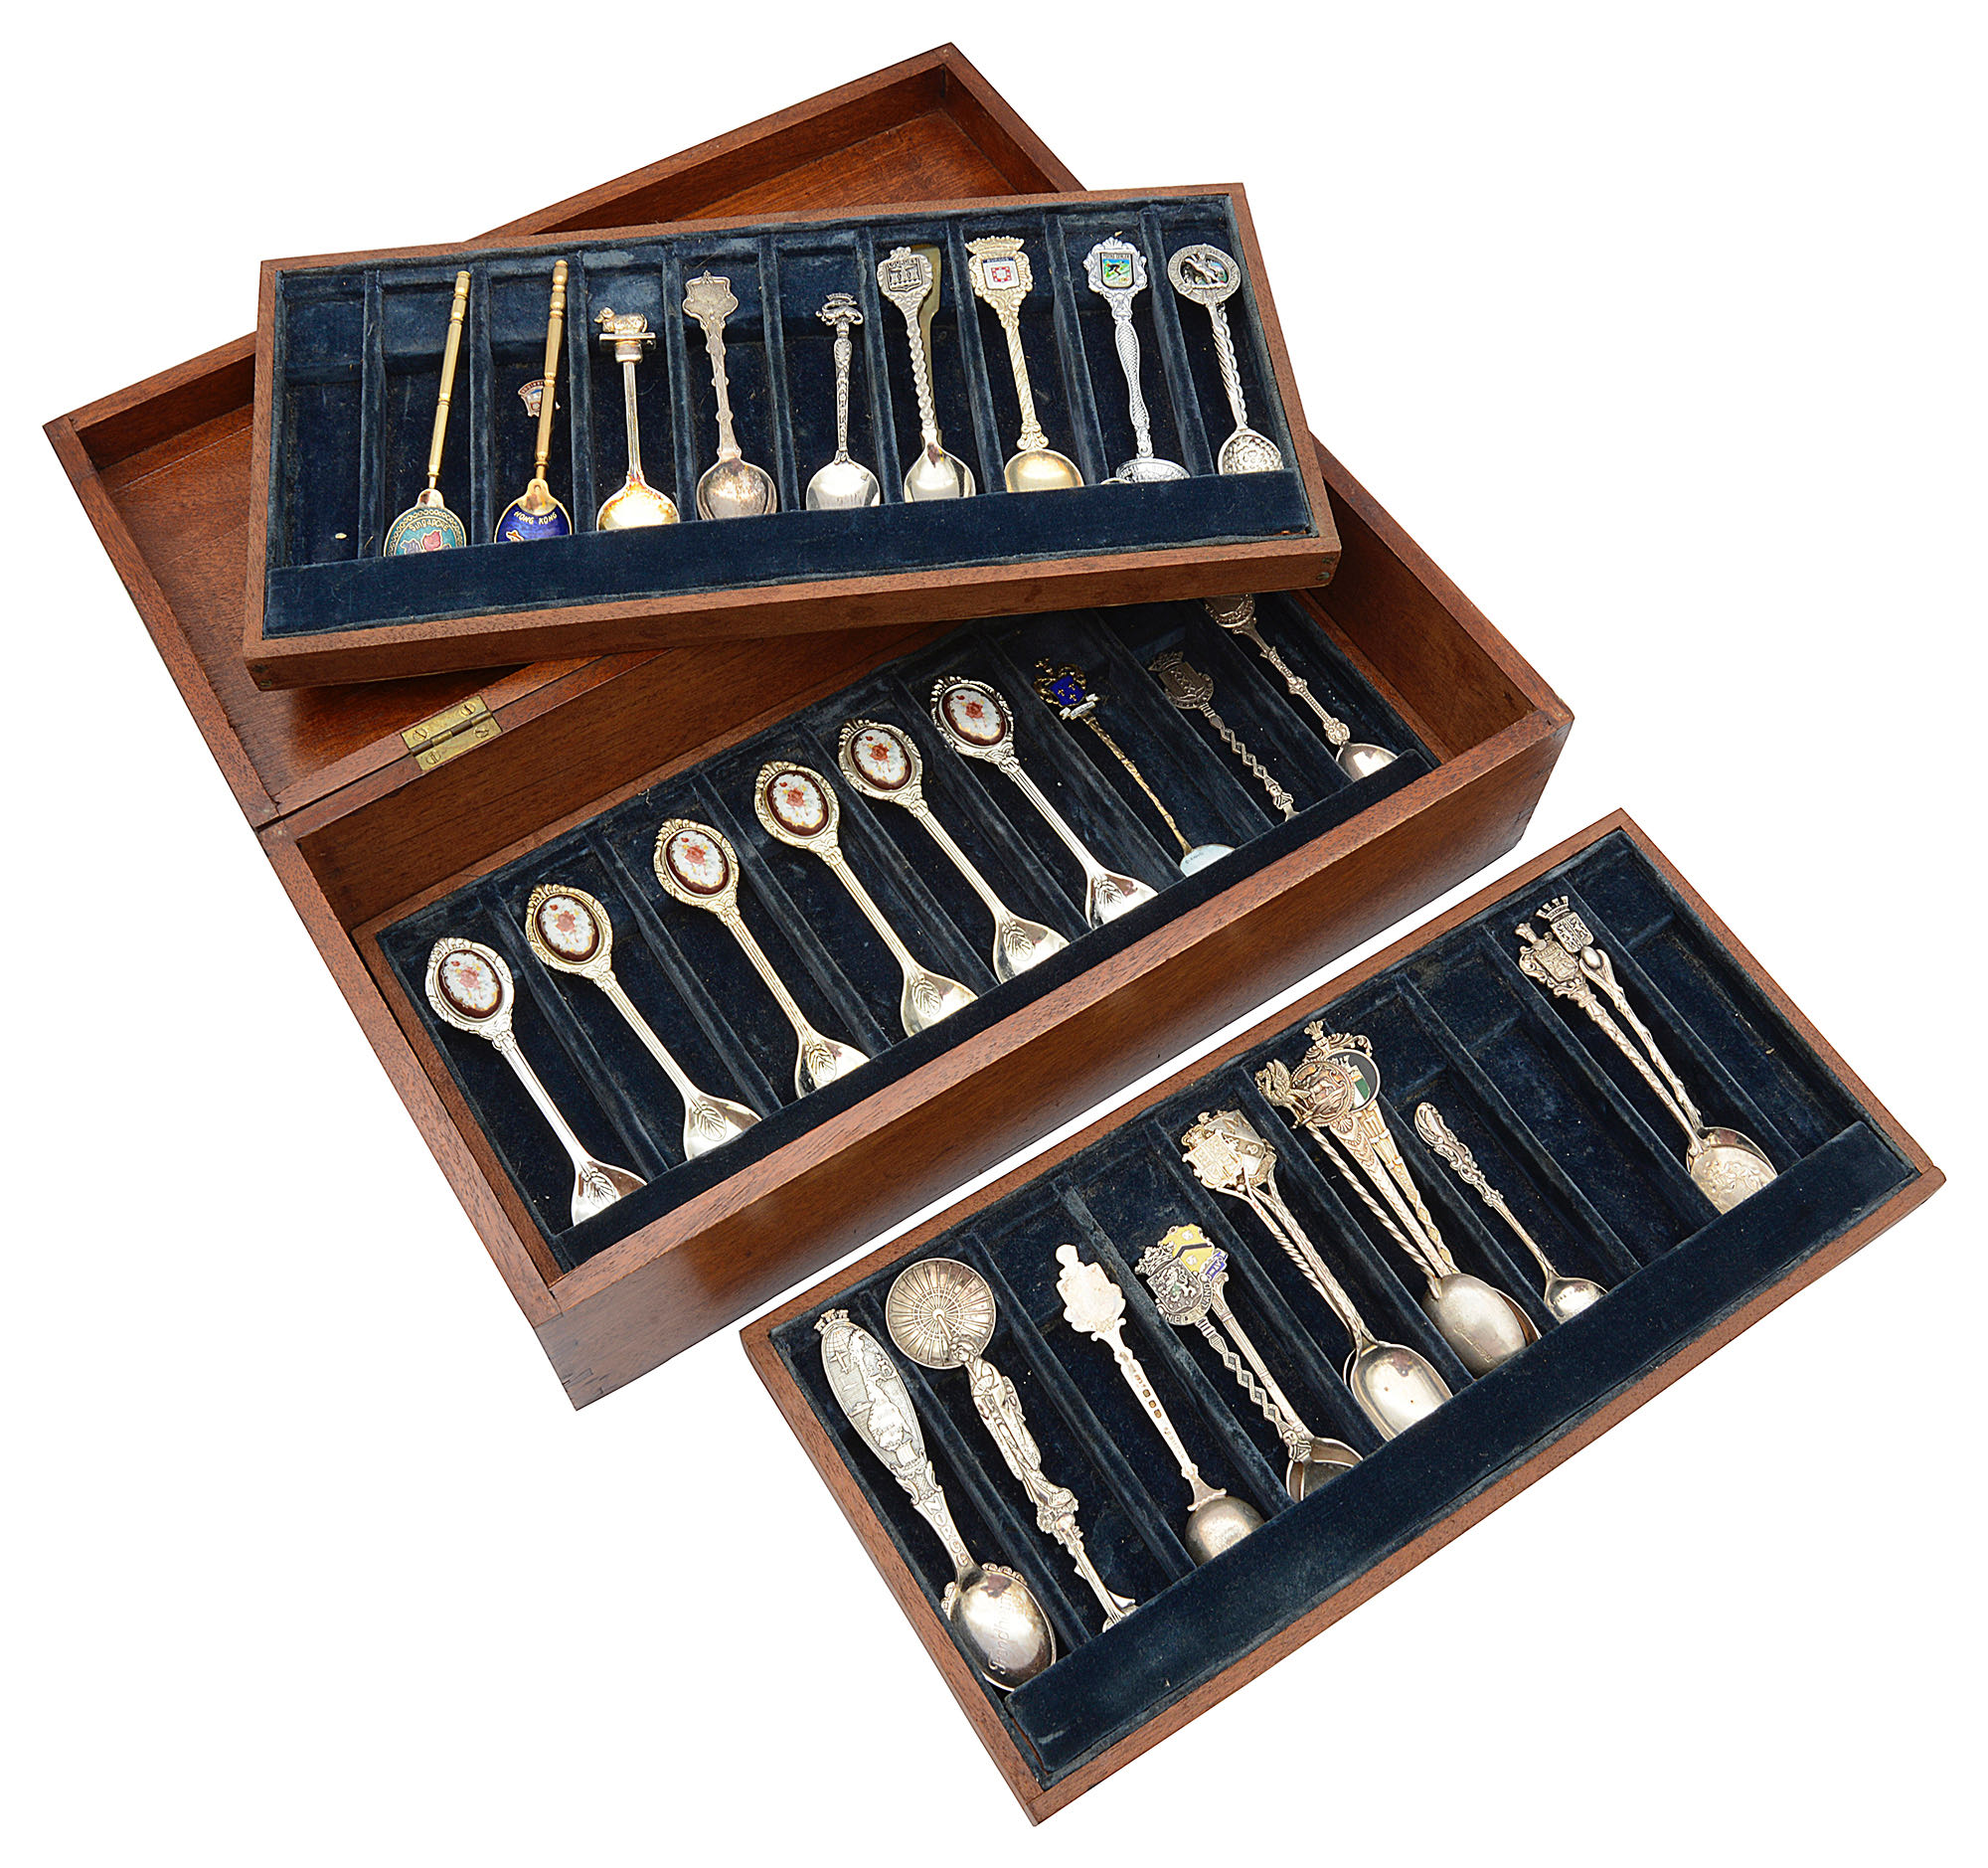 A collection of silver and silver plated souvenir coffee spoons